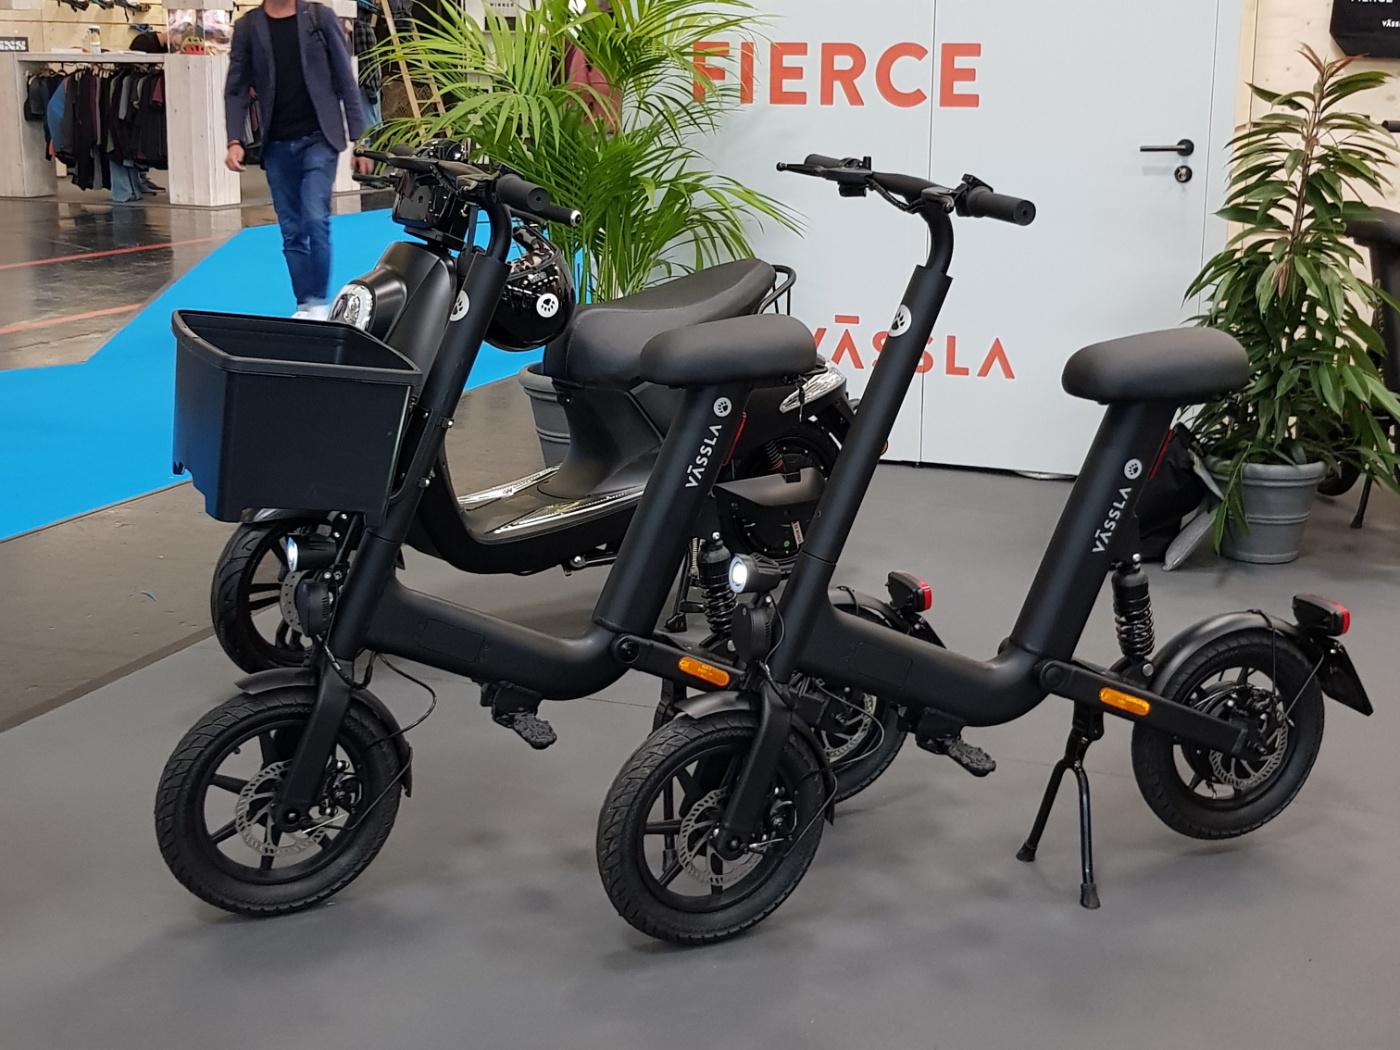 The company Vässla Micromobility says it is the market leader in the e-mobility sector in its home country of Sweden. The Vässla bike is a cross between an e-scooter and an e-bike and is supposed to combine the advantages of both vehicle classes. The Vässla 2 e-scooter has a more classical background. It is 45 km/h fast and has a maximum range of 120 km.